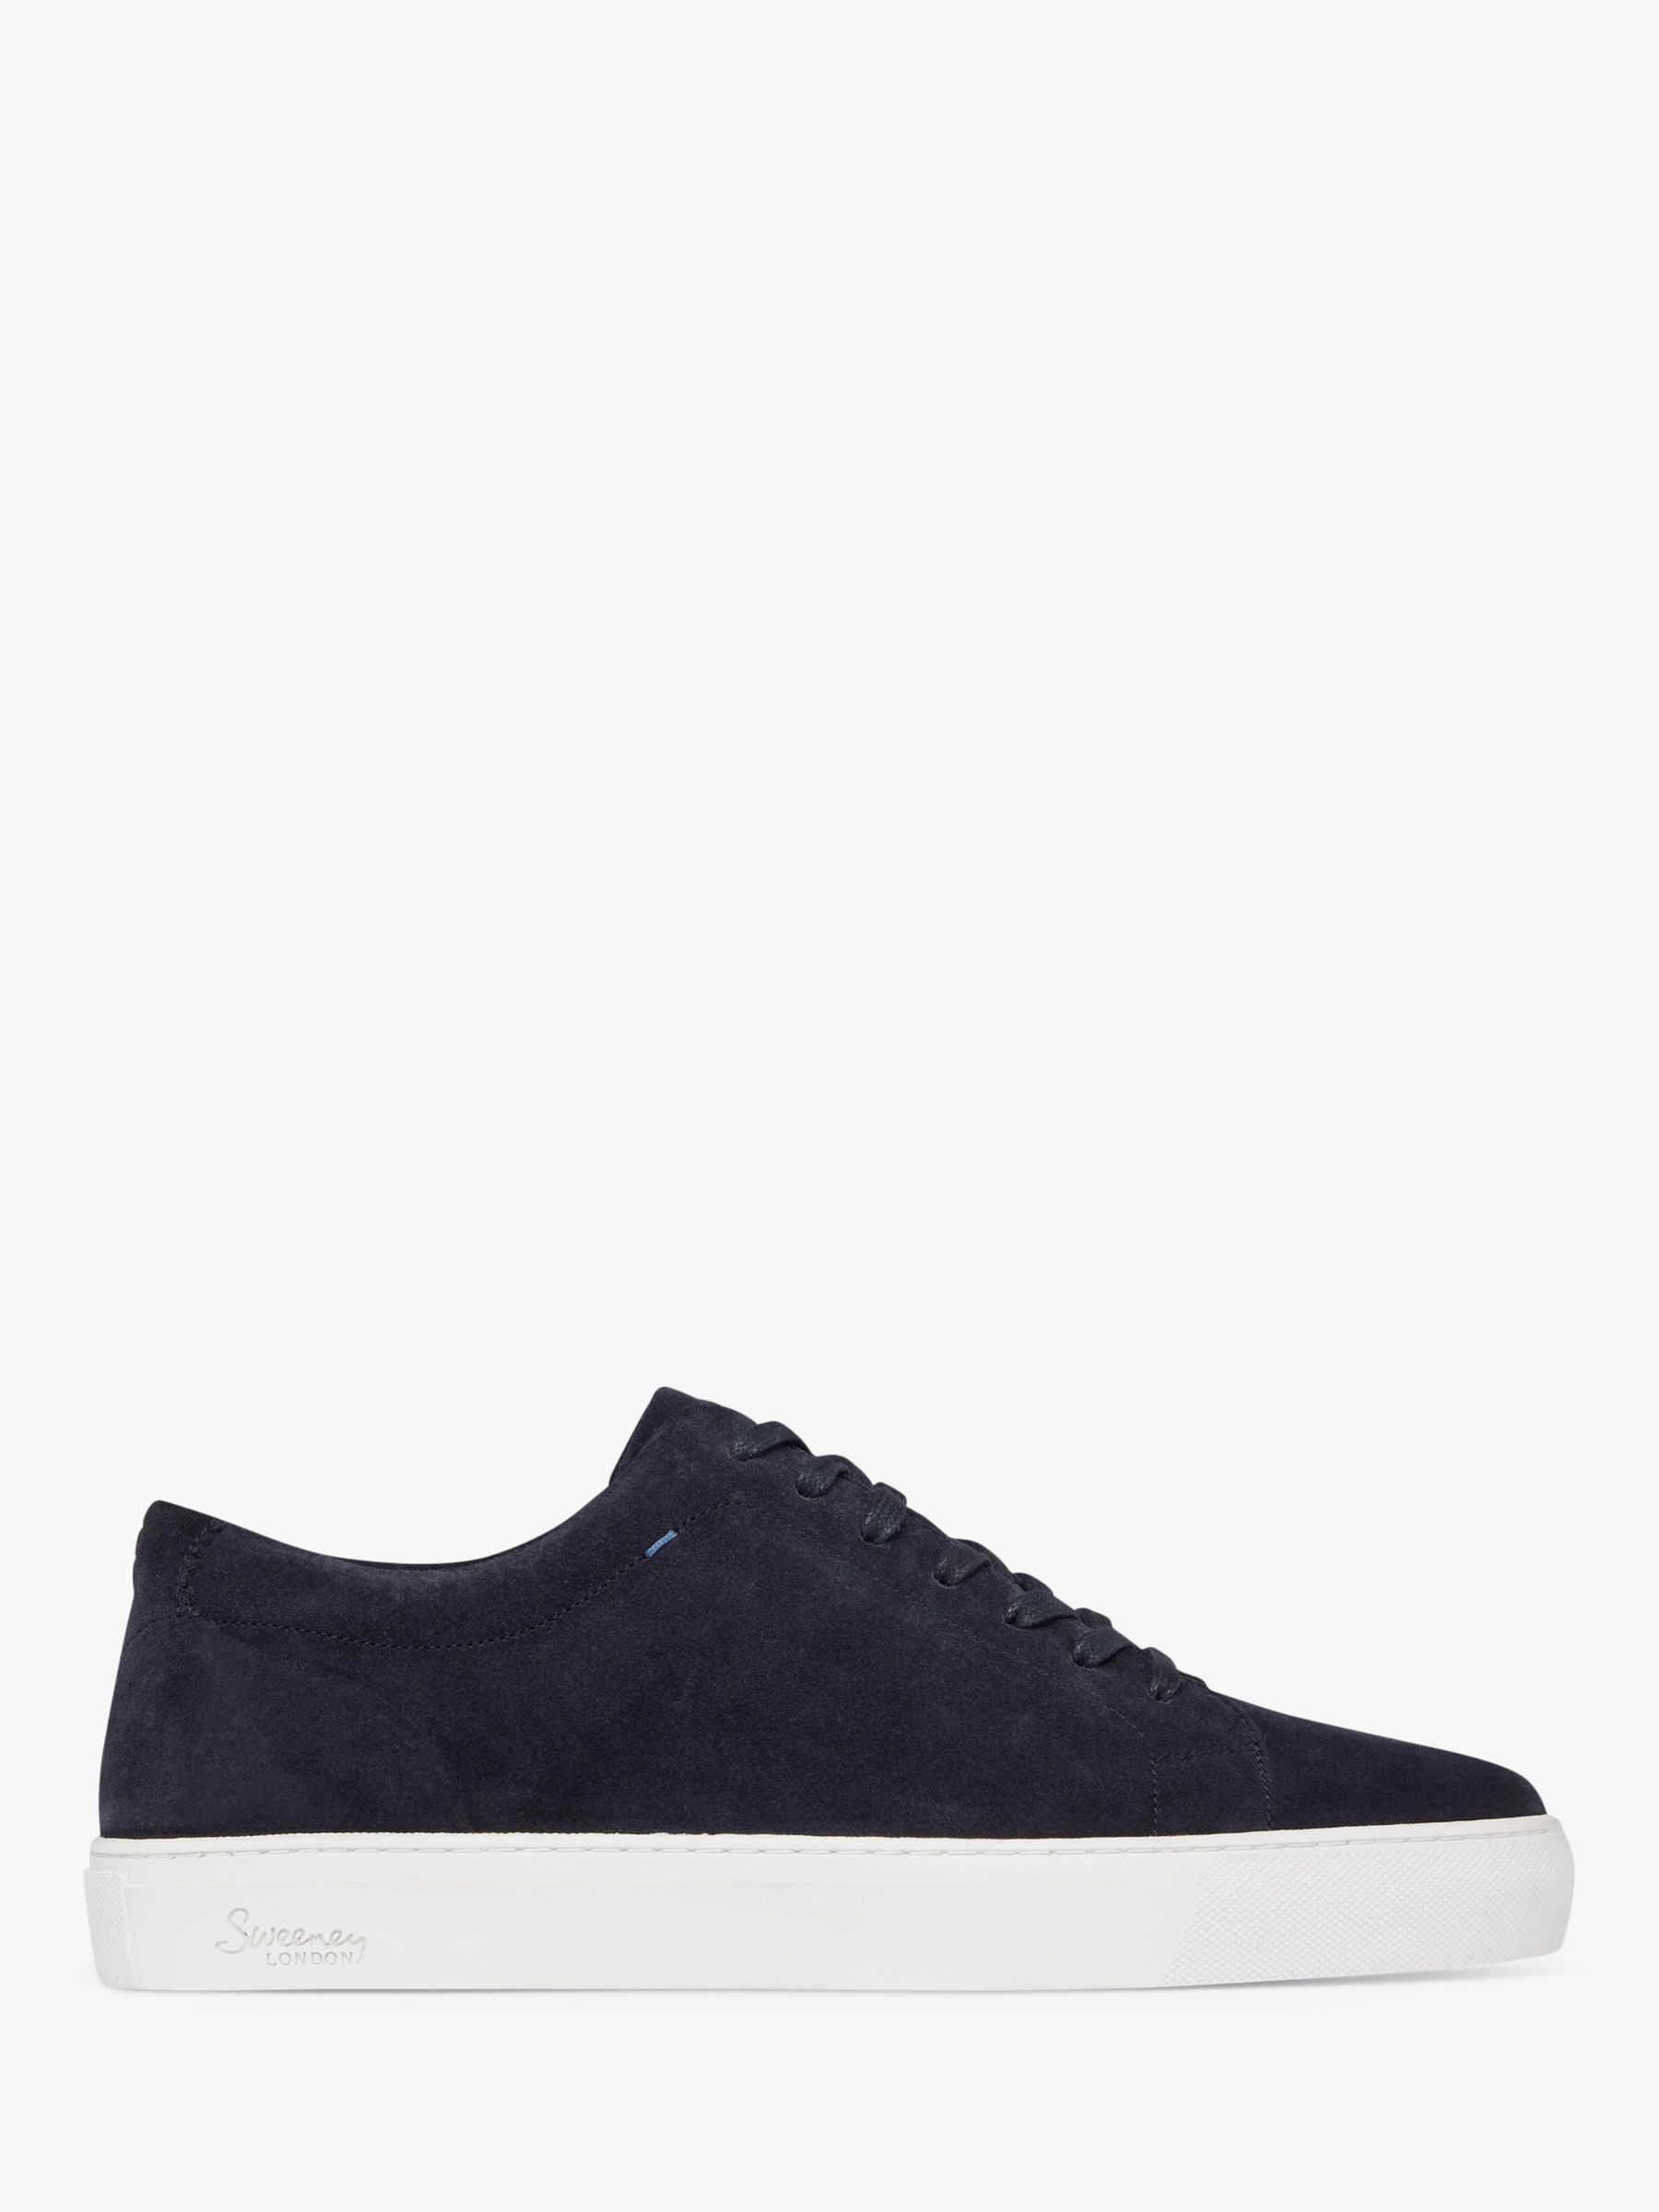 Oliver Sweeney Hayle Suede Trainers, Navy at John Lewis & Partners